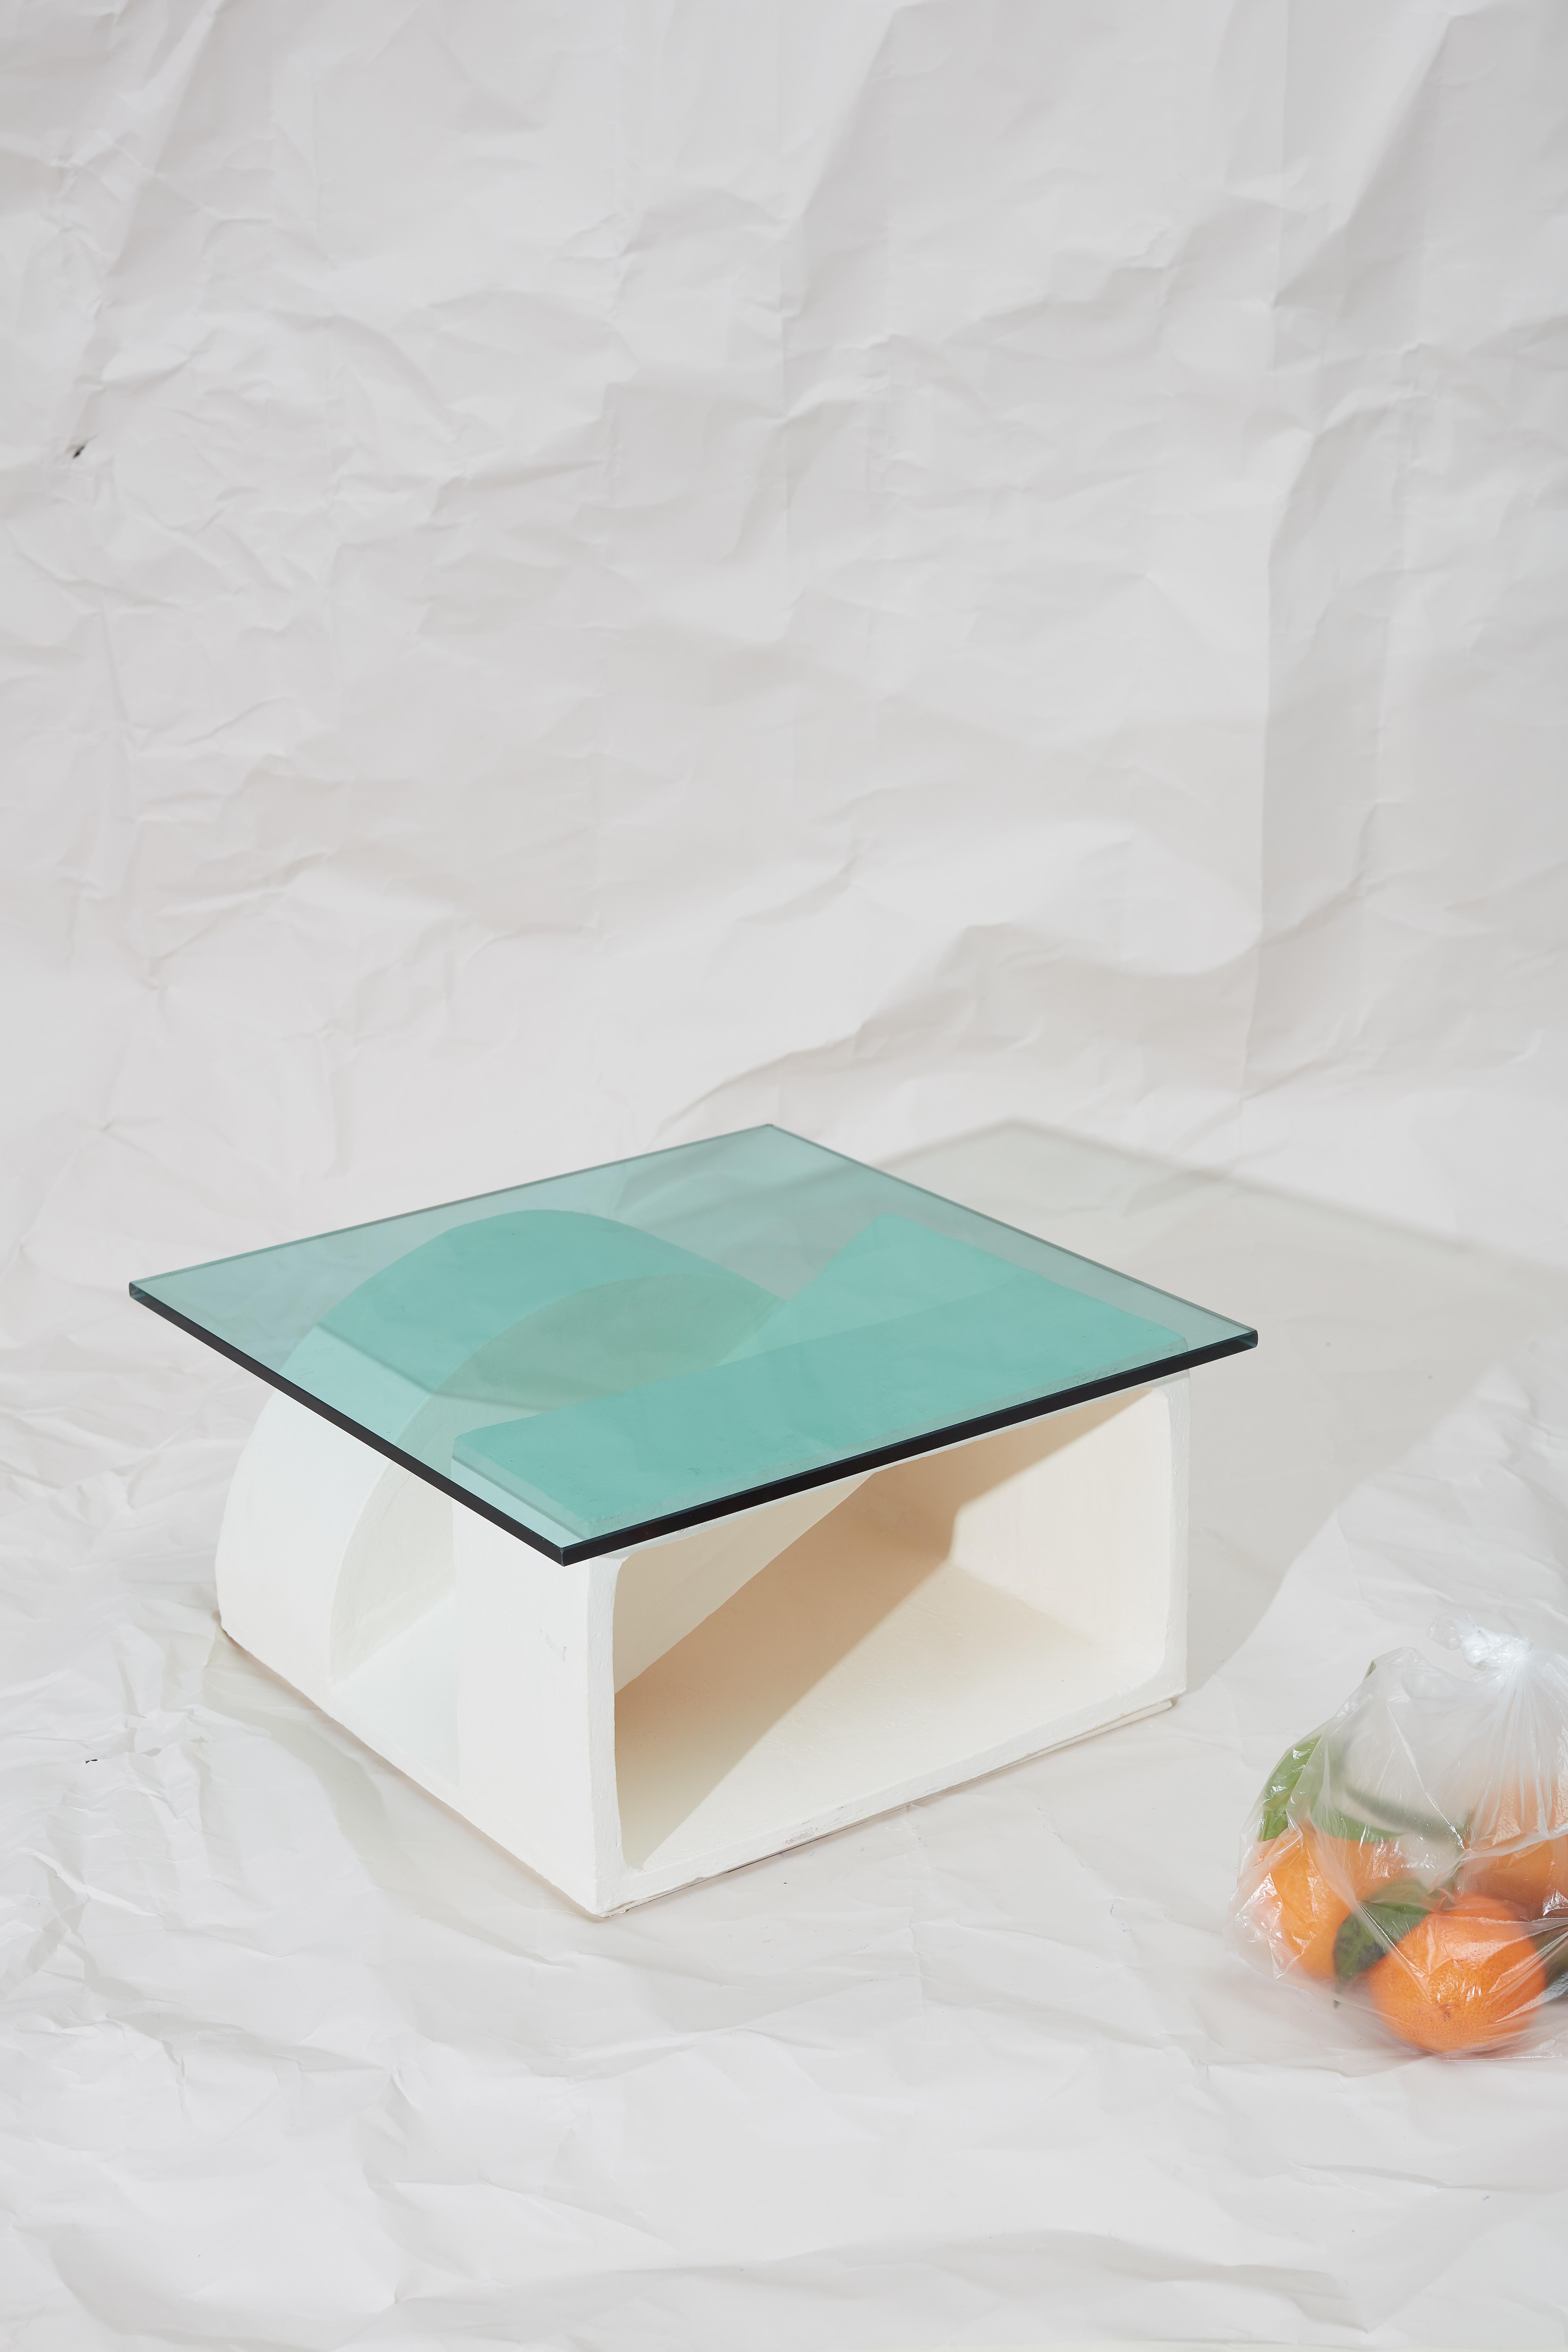 Unique ceramic side table by Theodora Alfredsdottir
Unique 
Materials: white. Stoneware and green glass
Dimensions: 40 x 40 x 20 cm
 Glass 44 x 44 x 0.6 cm

A collection of ceramic side tables that explore the possibility of using a single